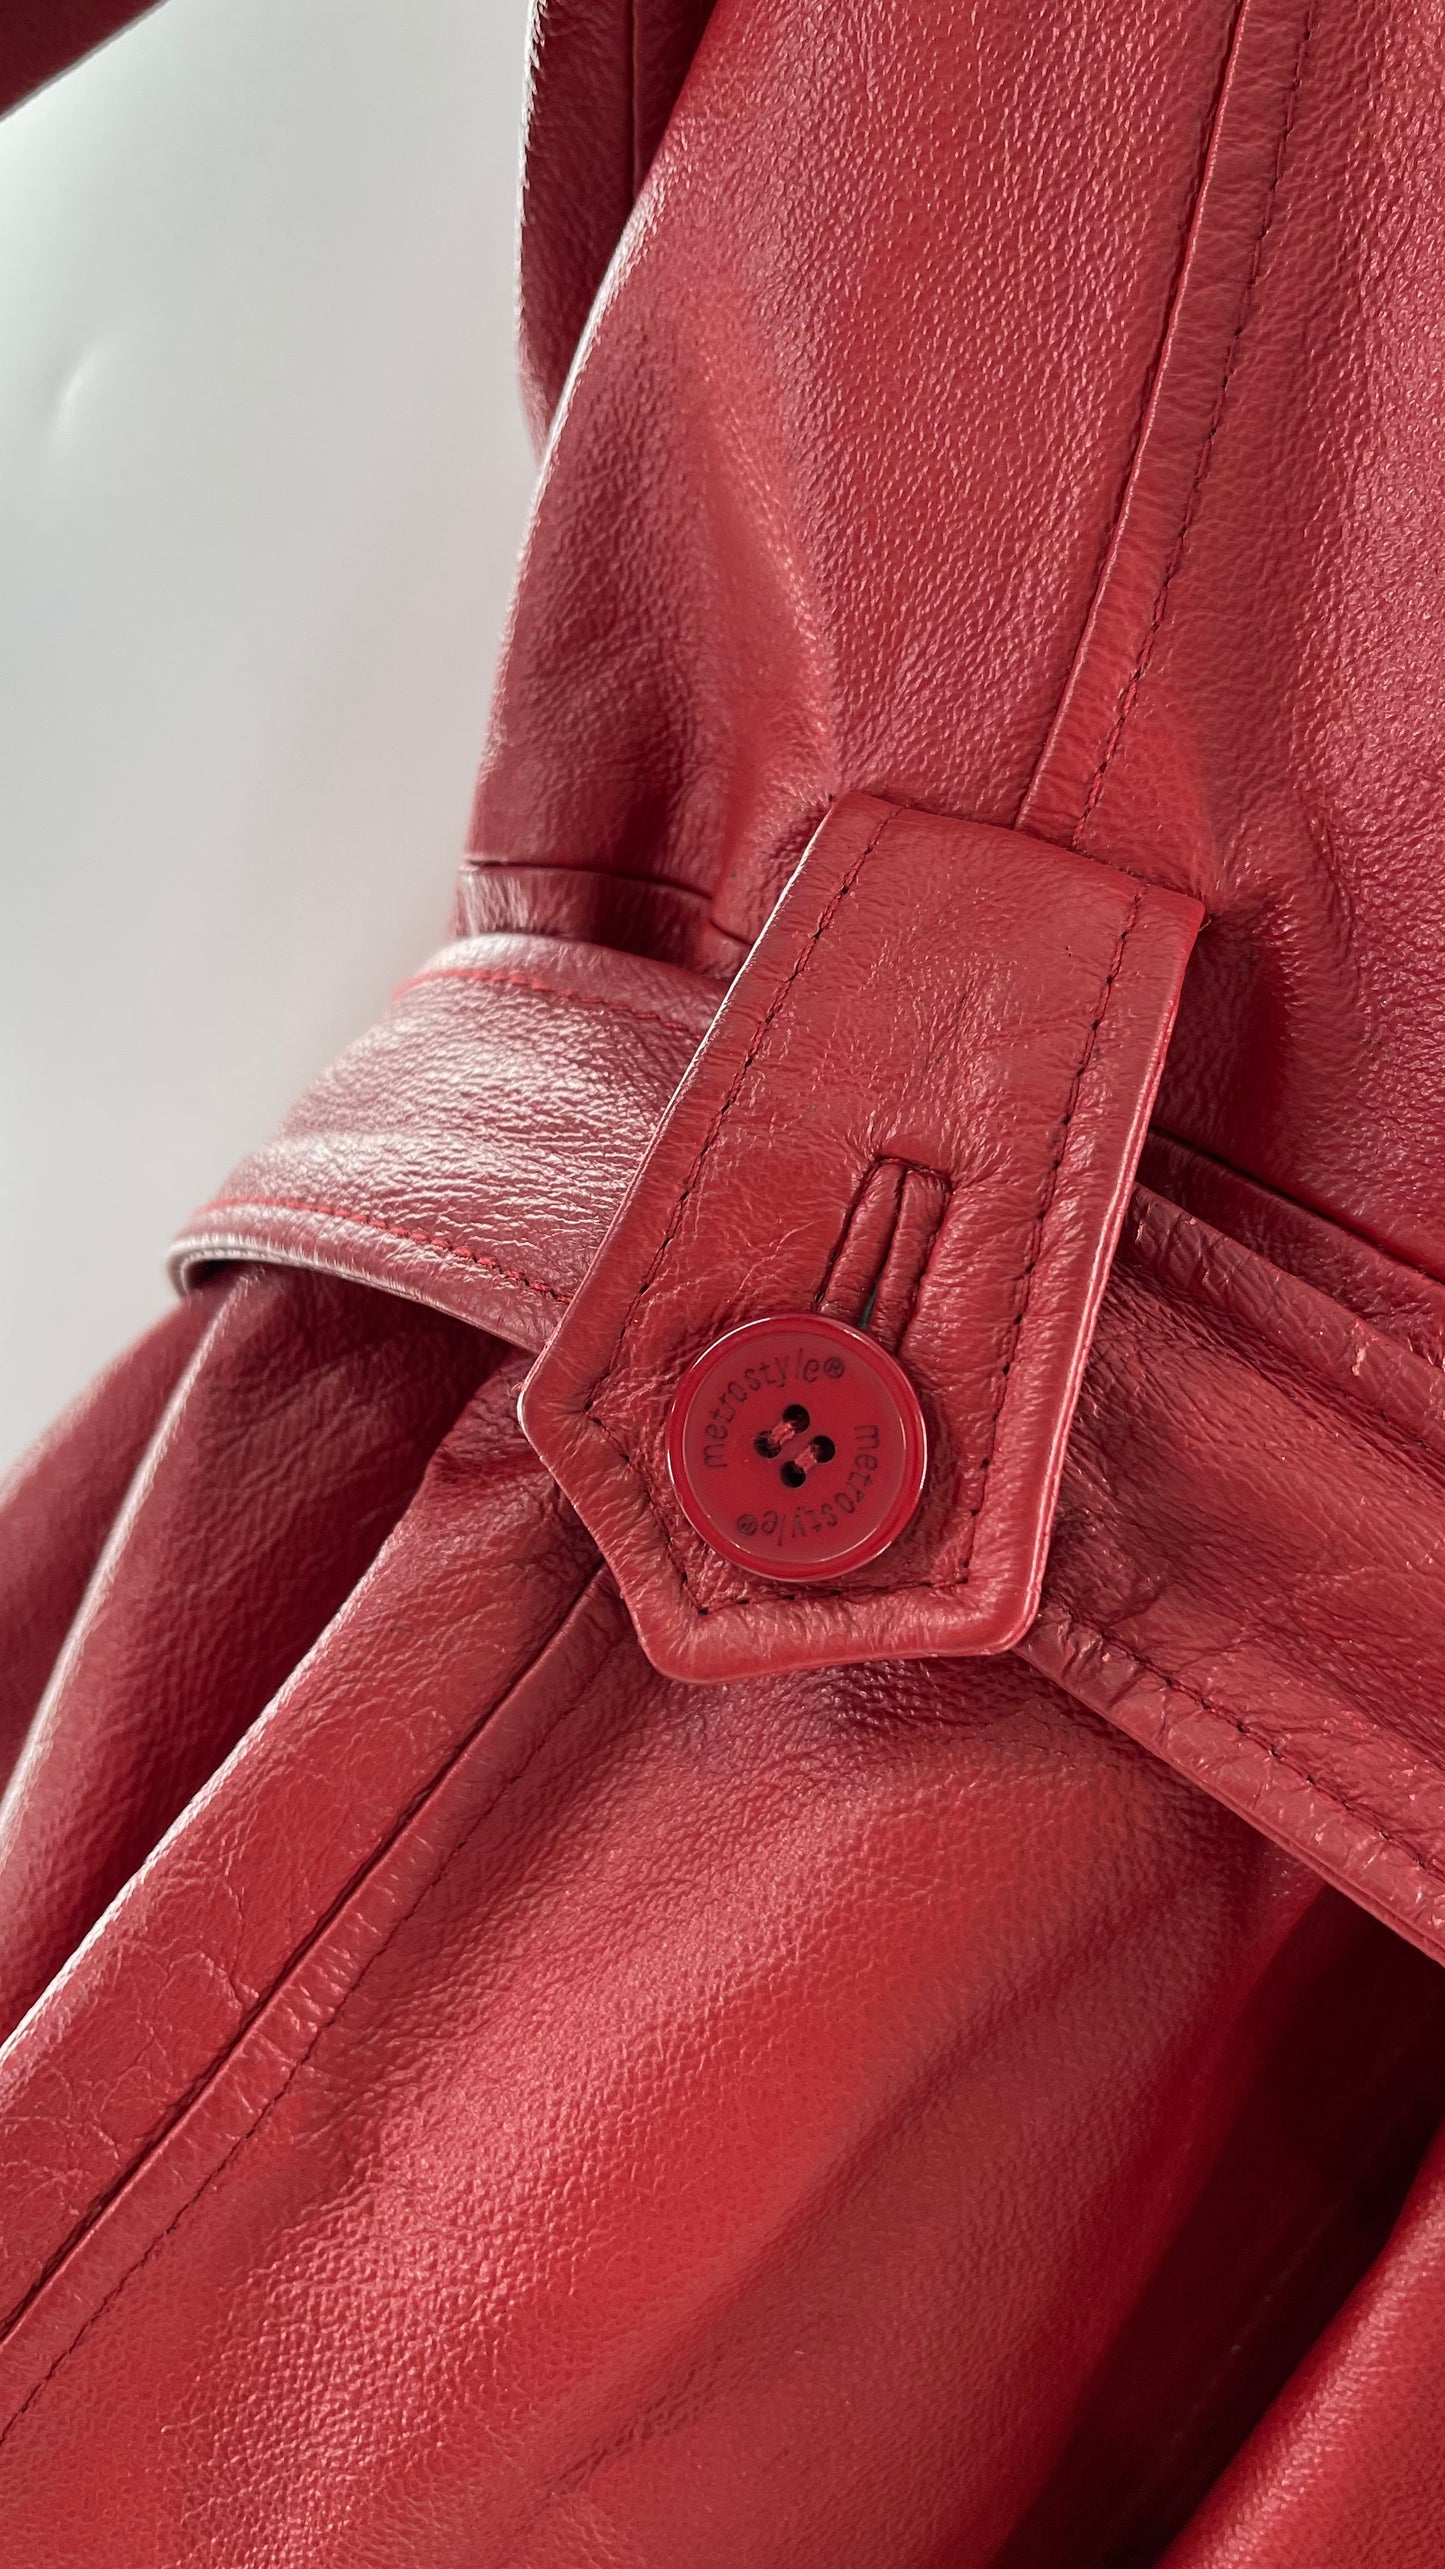 Vintage MetroStyle Red Leather Trench (C)(L/XL)